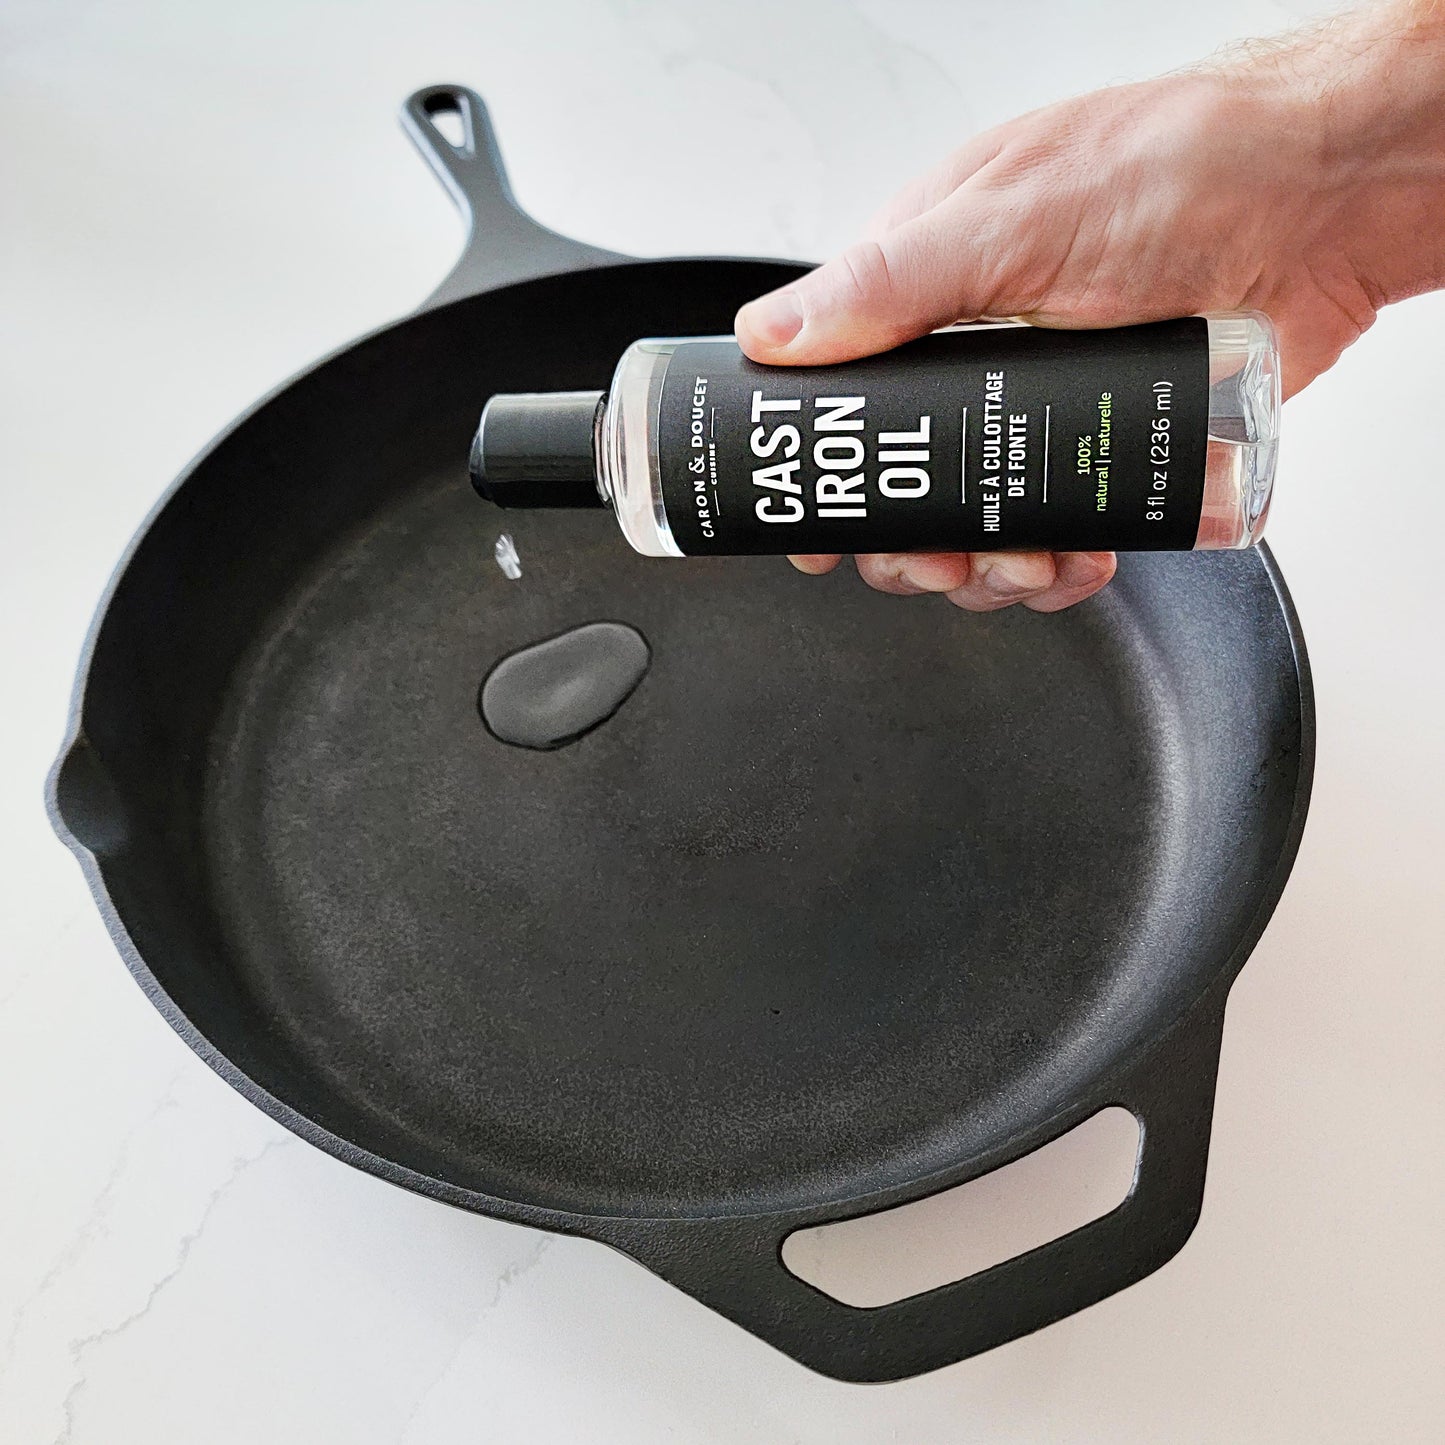 Culina Cast Iron Seasoning Stick & Soap & Oil Conditioner & Restoring Scrub  & Stainless Scrubber, All Natural Ingredients, Best for Cleaning,  Non-stick Cooking & Restoring